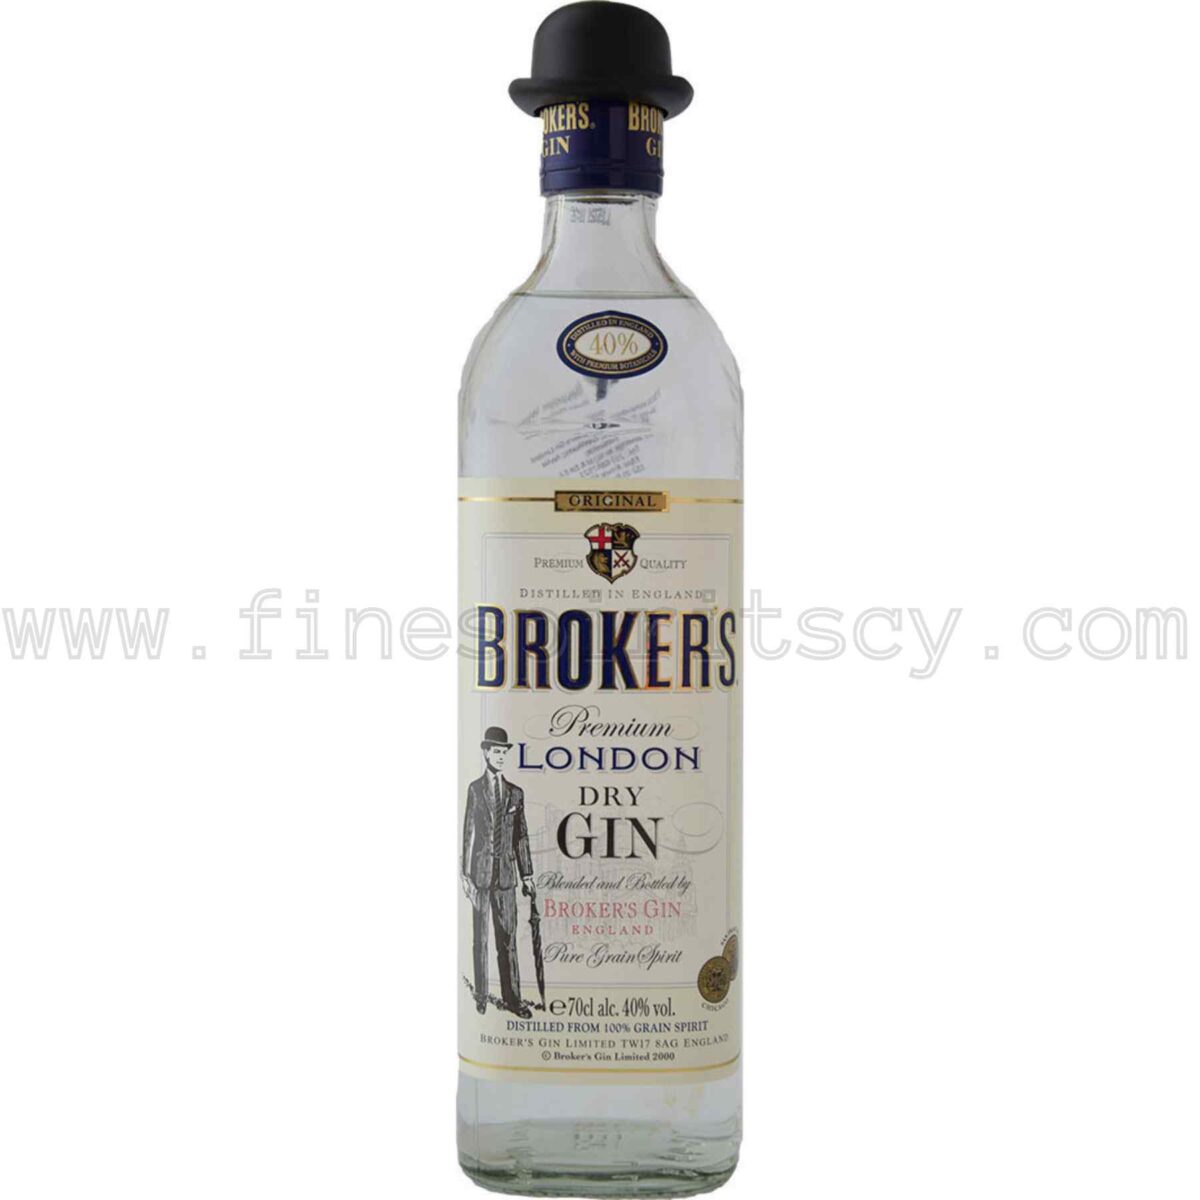 Brokers London Dry Gin 700ml 40% 80 Proof ABV